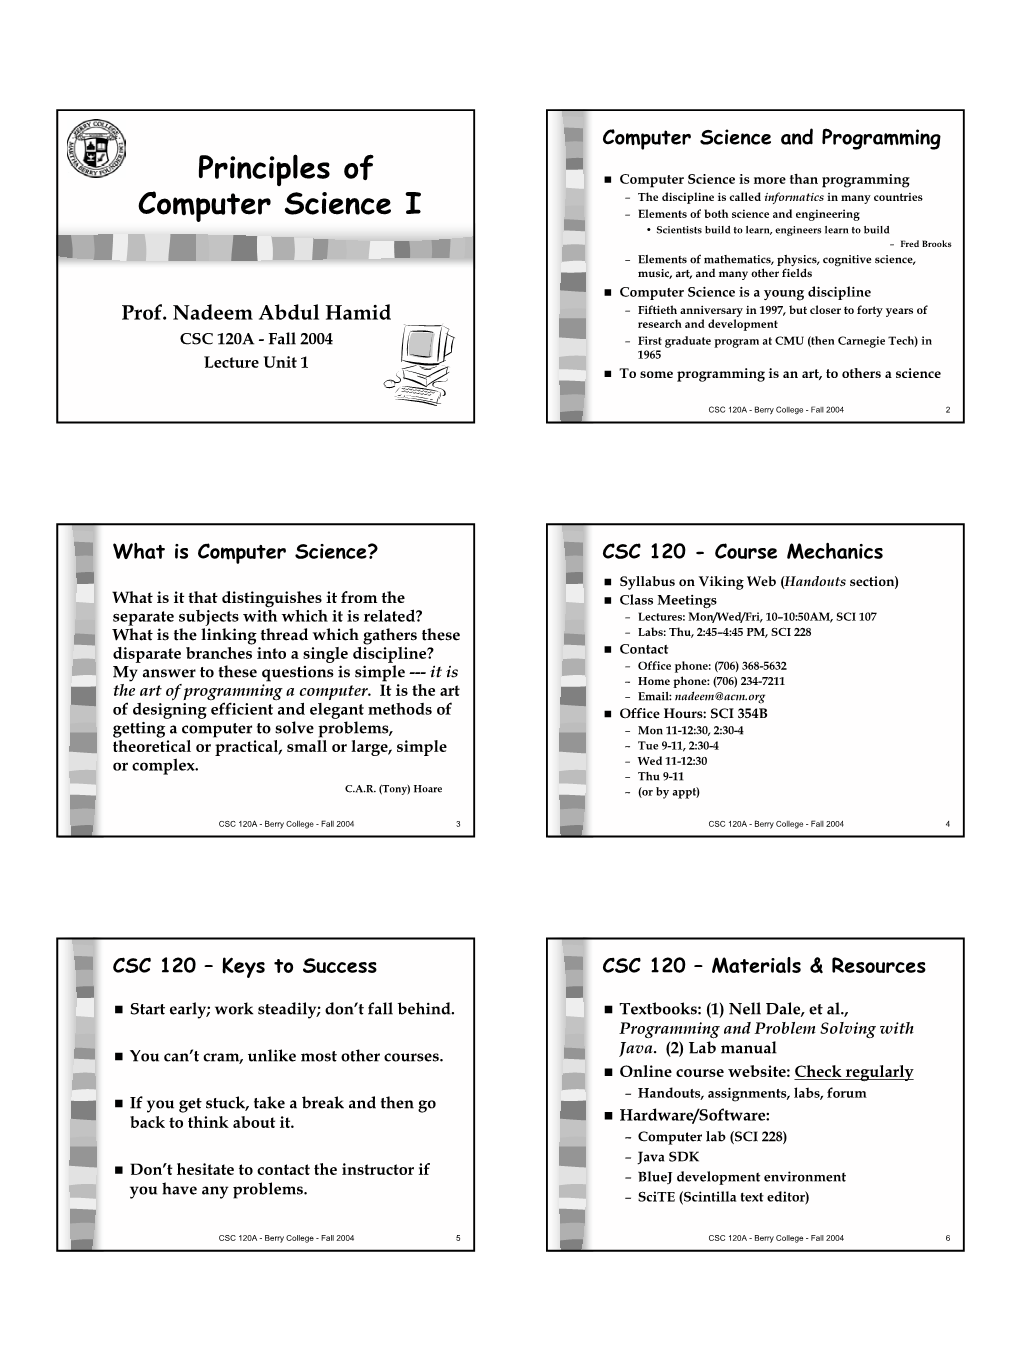 Principles of Computer Science I